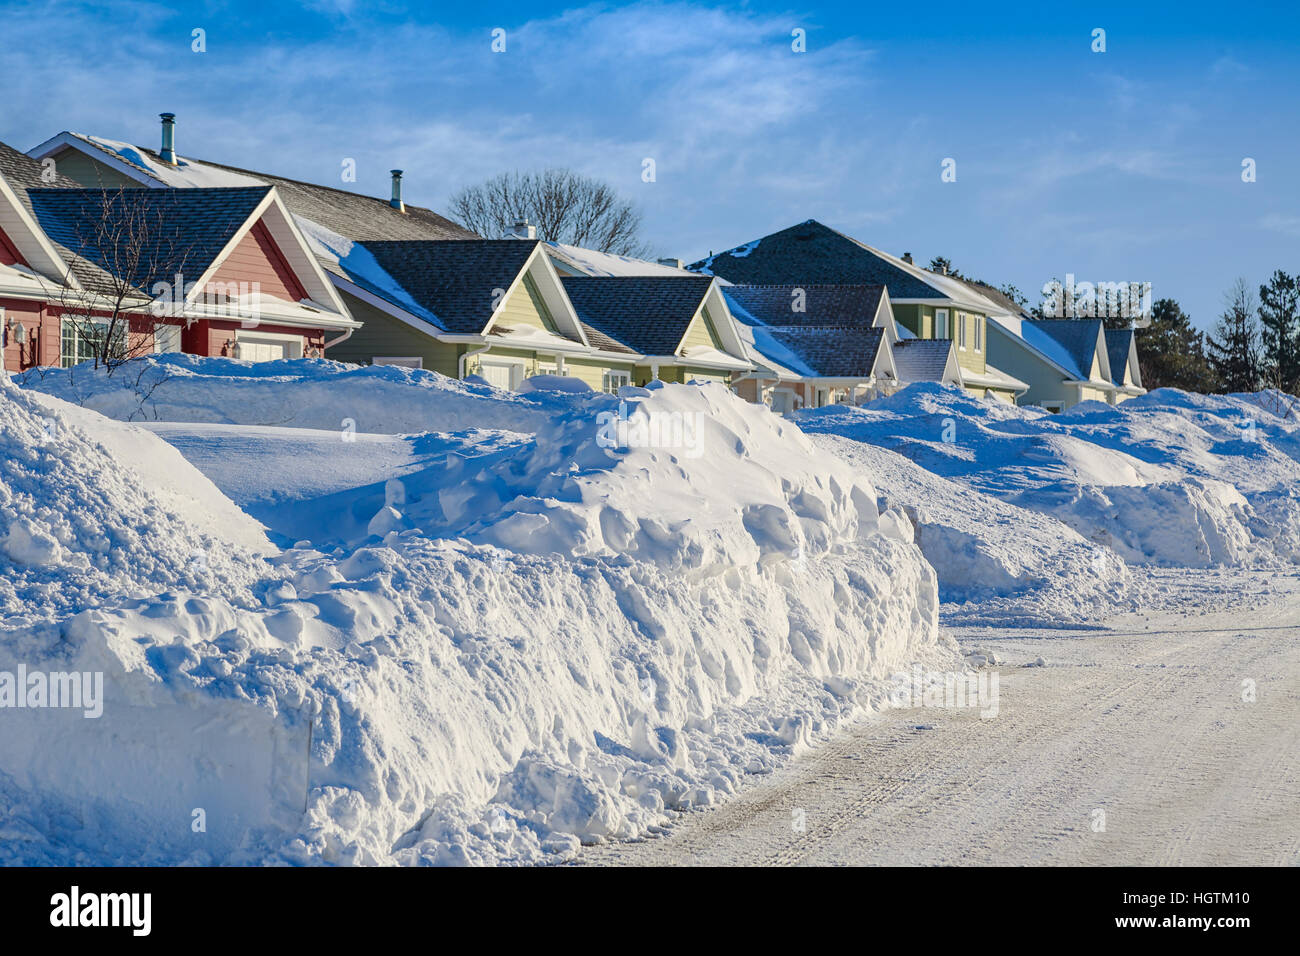 Homes in a North American suburb after a snow storm Stock Photo - Alamy